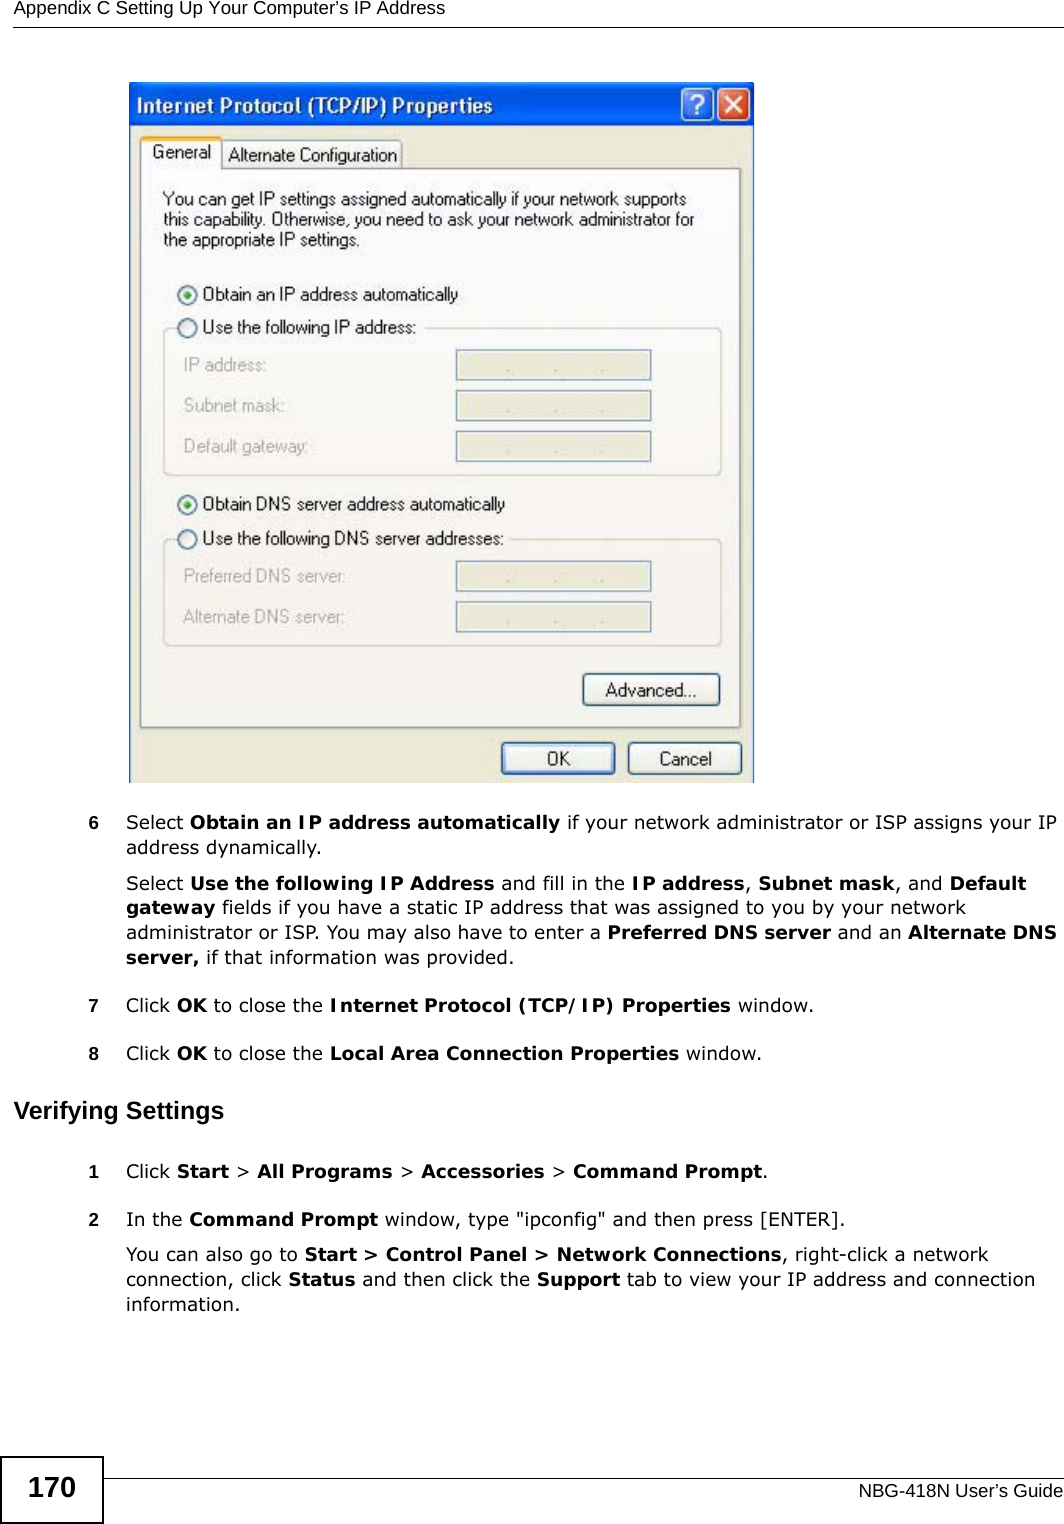 Appendix C Setting Up Your Computer’s IP AddressNBG-418N User’s Guide1706Select Obtain an IP address automatically if your network administrator or ISP assigns your IP address dynamically.Select Use the following IP Address and fill in the IP address, Subnet mask, and Default gateway fields if you have a static IP address that was assigned to you by your network administrator or ISP. You may also have to enter a Preferred DNS server and an Alternate DNS server, if that information was provided.7Click OK to close the Internet Protocol (TCP/IP) Properties window.8Click OK to close the Local Area Connection Properties window.Verifying Settings1Click Start &gt; All Programs &gt; Accessories &gt; Command Prompt.2In the Command Prompt window, type &quot;ipconfig&quot; and then press [ENTER]. You can also go to Start &gt; Control Panel &gt; Network Connections, right-click a network connection, click Status and then click the Support tab to view your IP address and connection information.